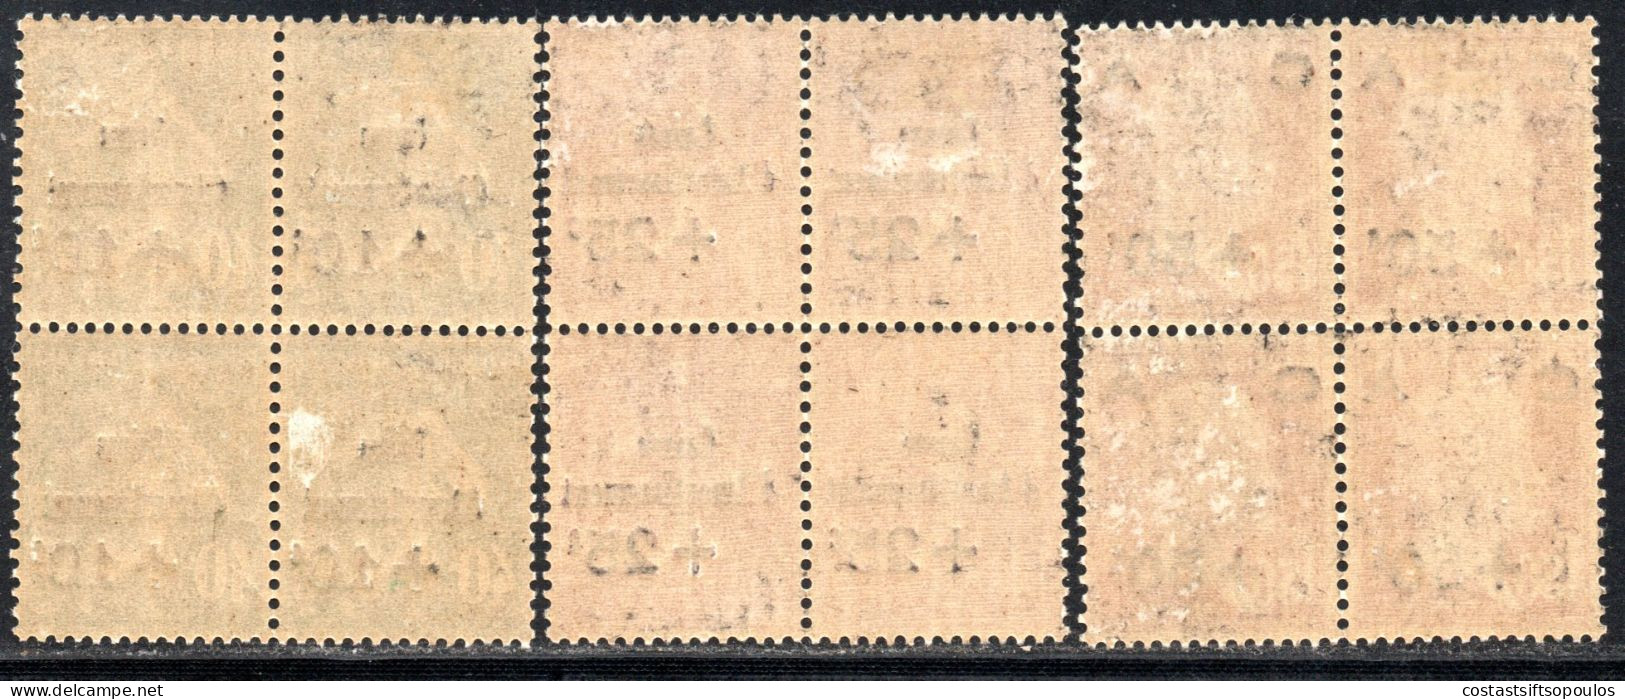 2614.FRANCE 1929 SINKING FUNDS #253-255 MNH BLOCKS OF 4,2-3 INVISIBLE TRACES OF HINGE.SEE VERY LIGHT GUM BLEMISHES - 1927-31 Cassa Di Ammortamento